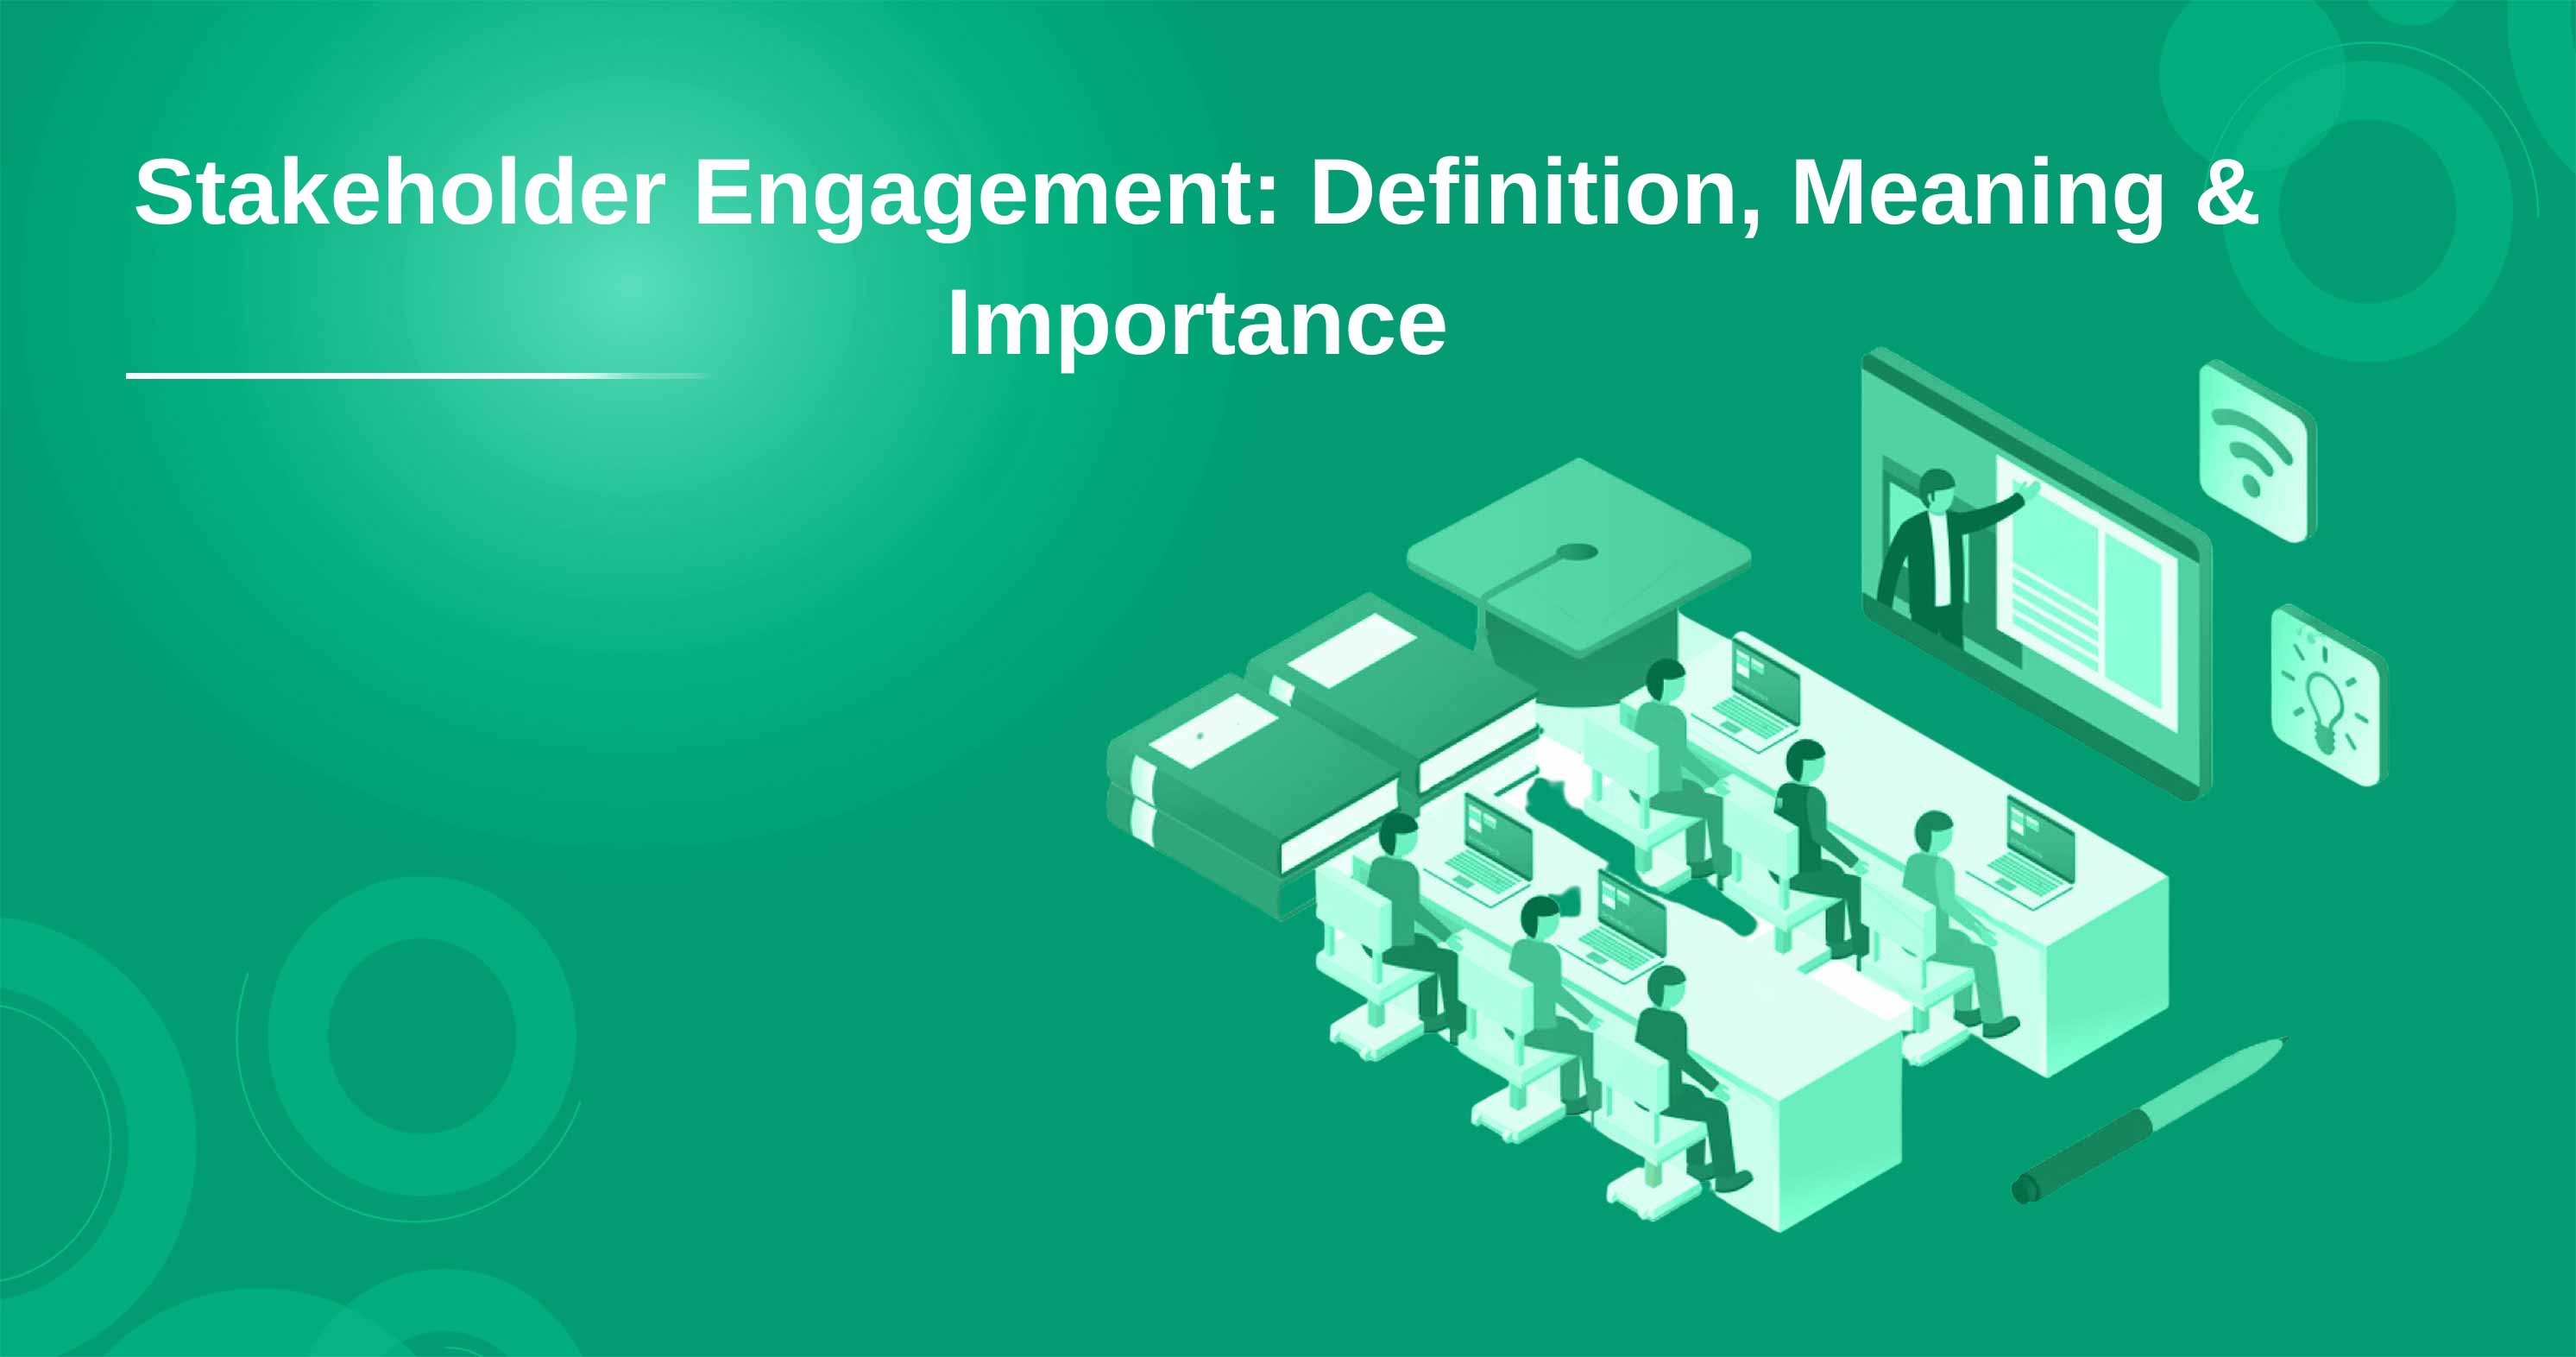 Stakeholder Engagement: Definition, Meaning & Importance